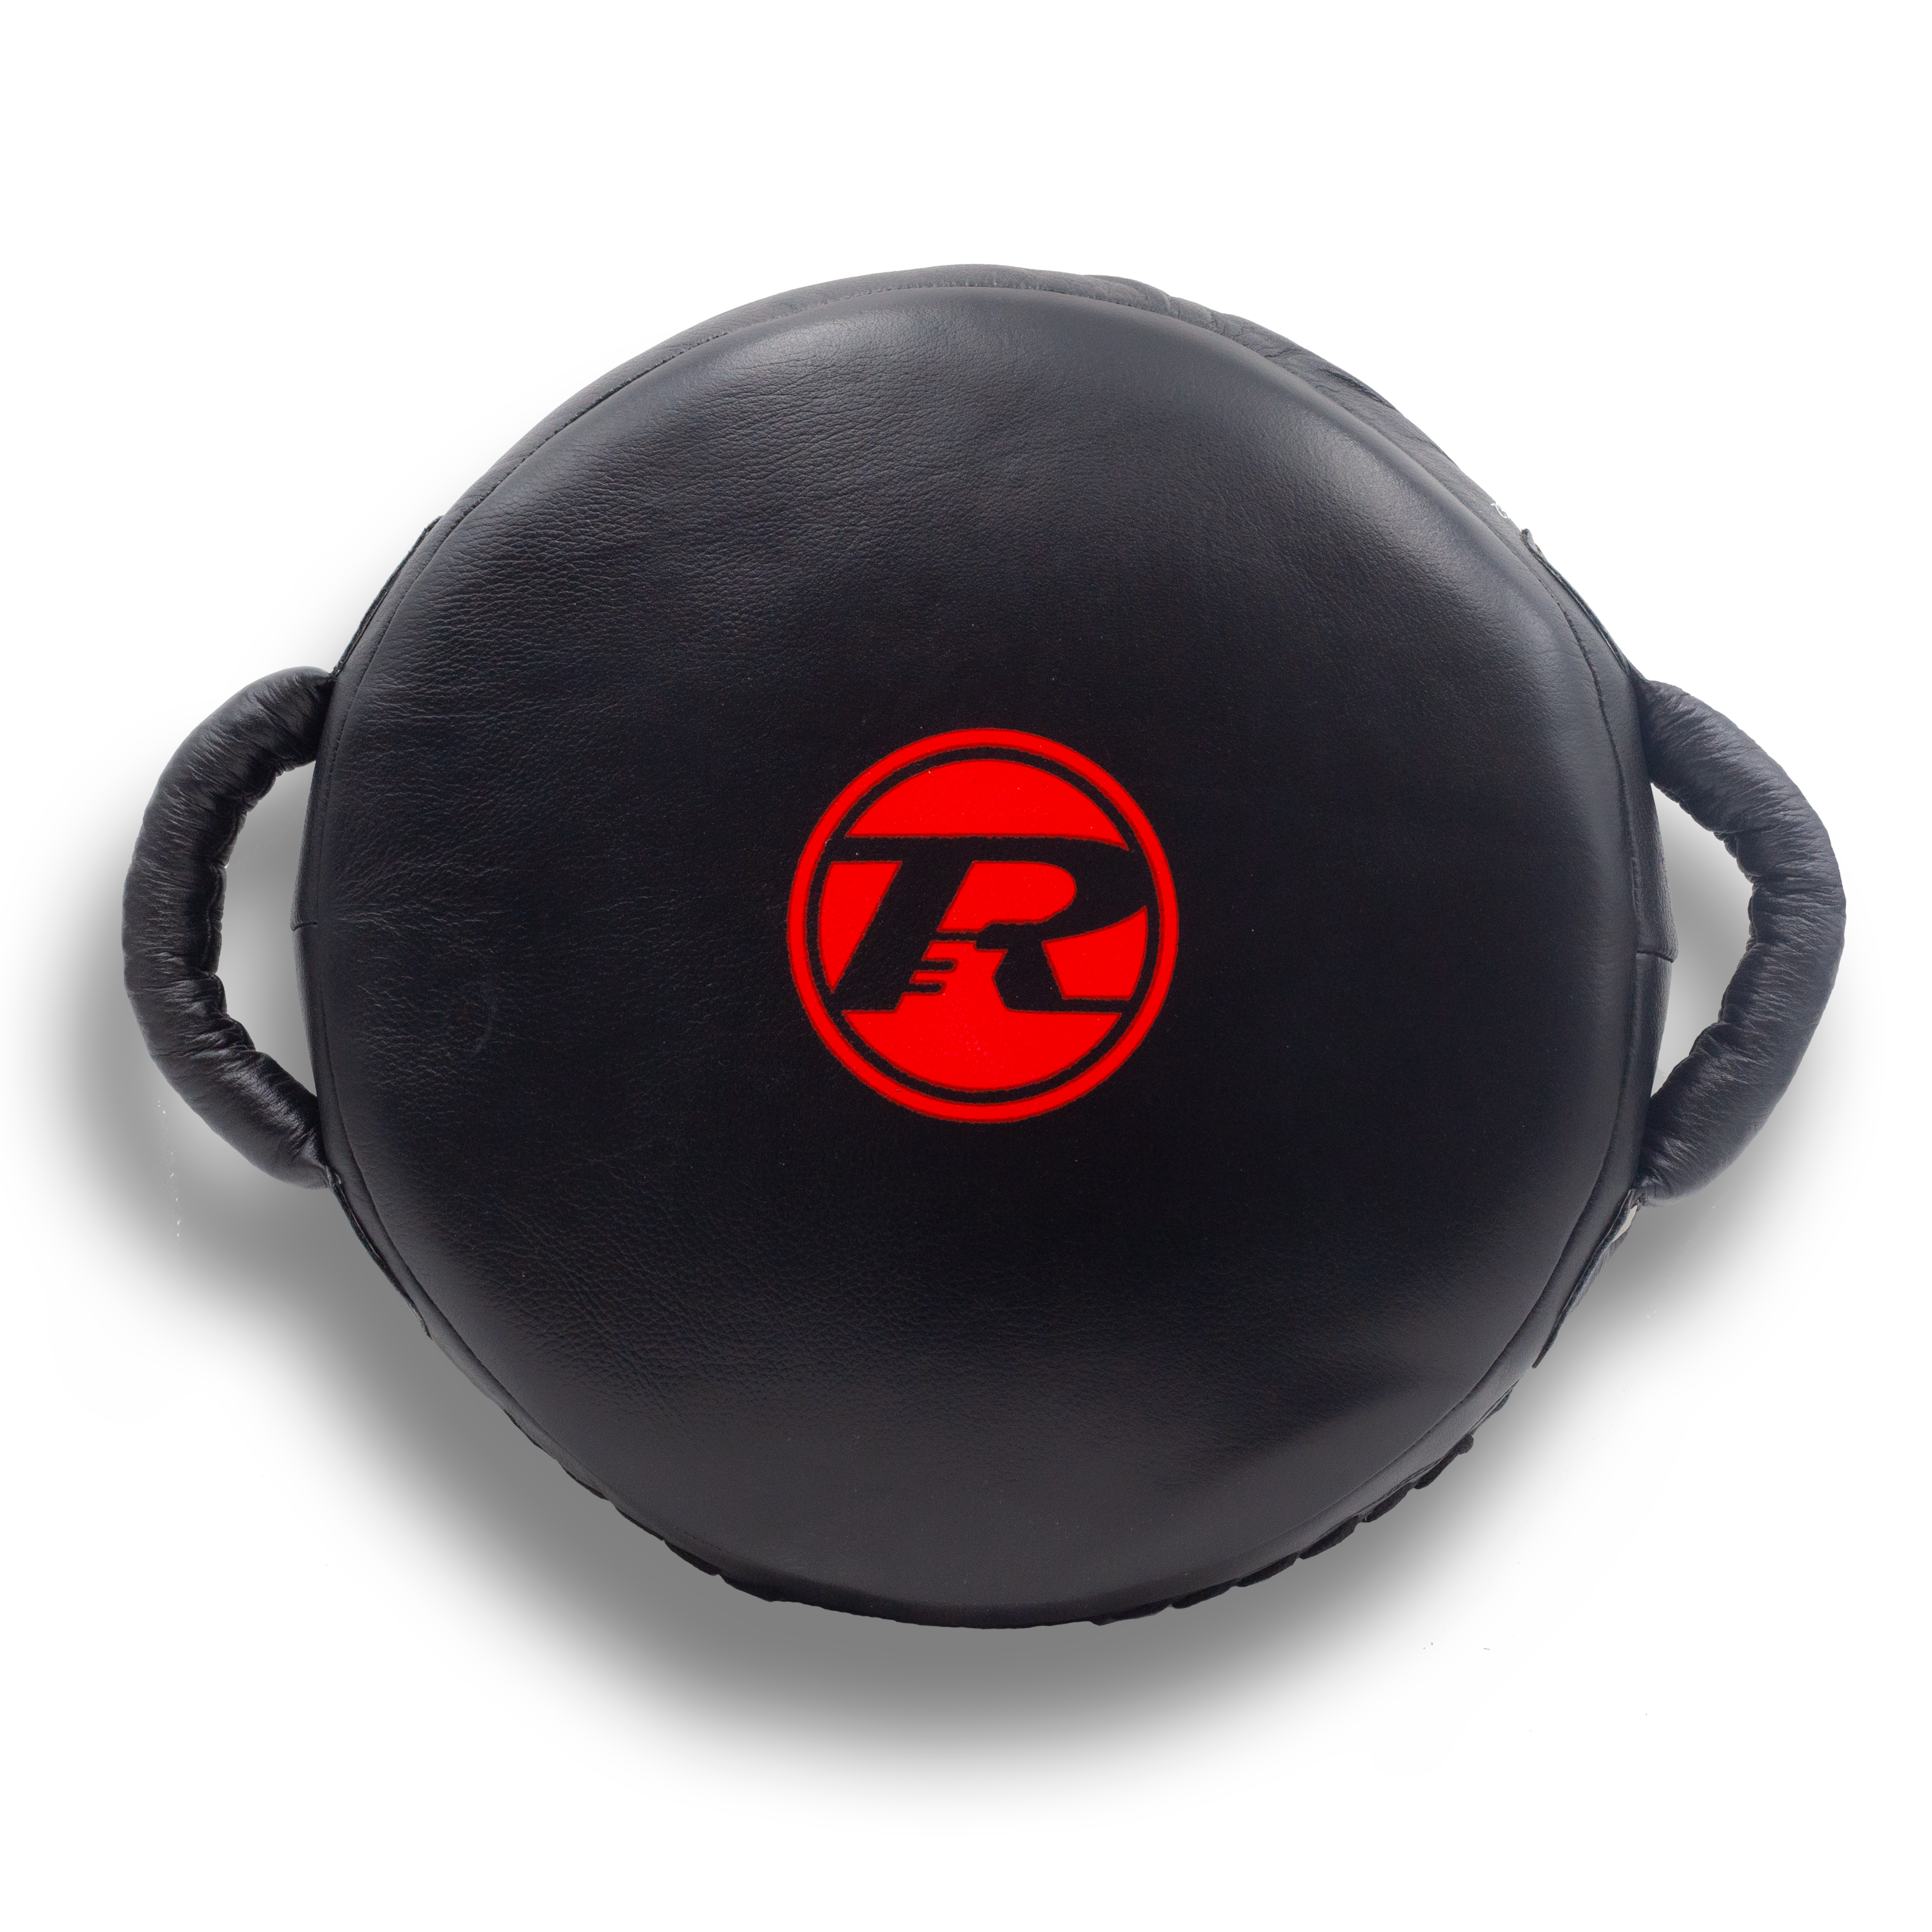 ProTect G2 Leather Circular Punch Pad 16" Black / Red